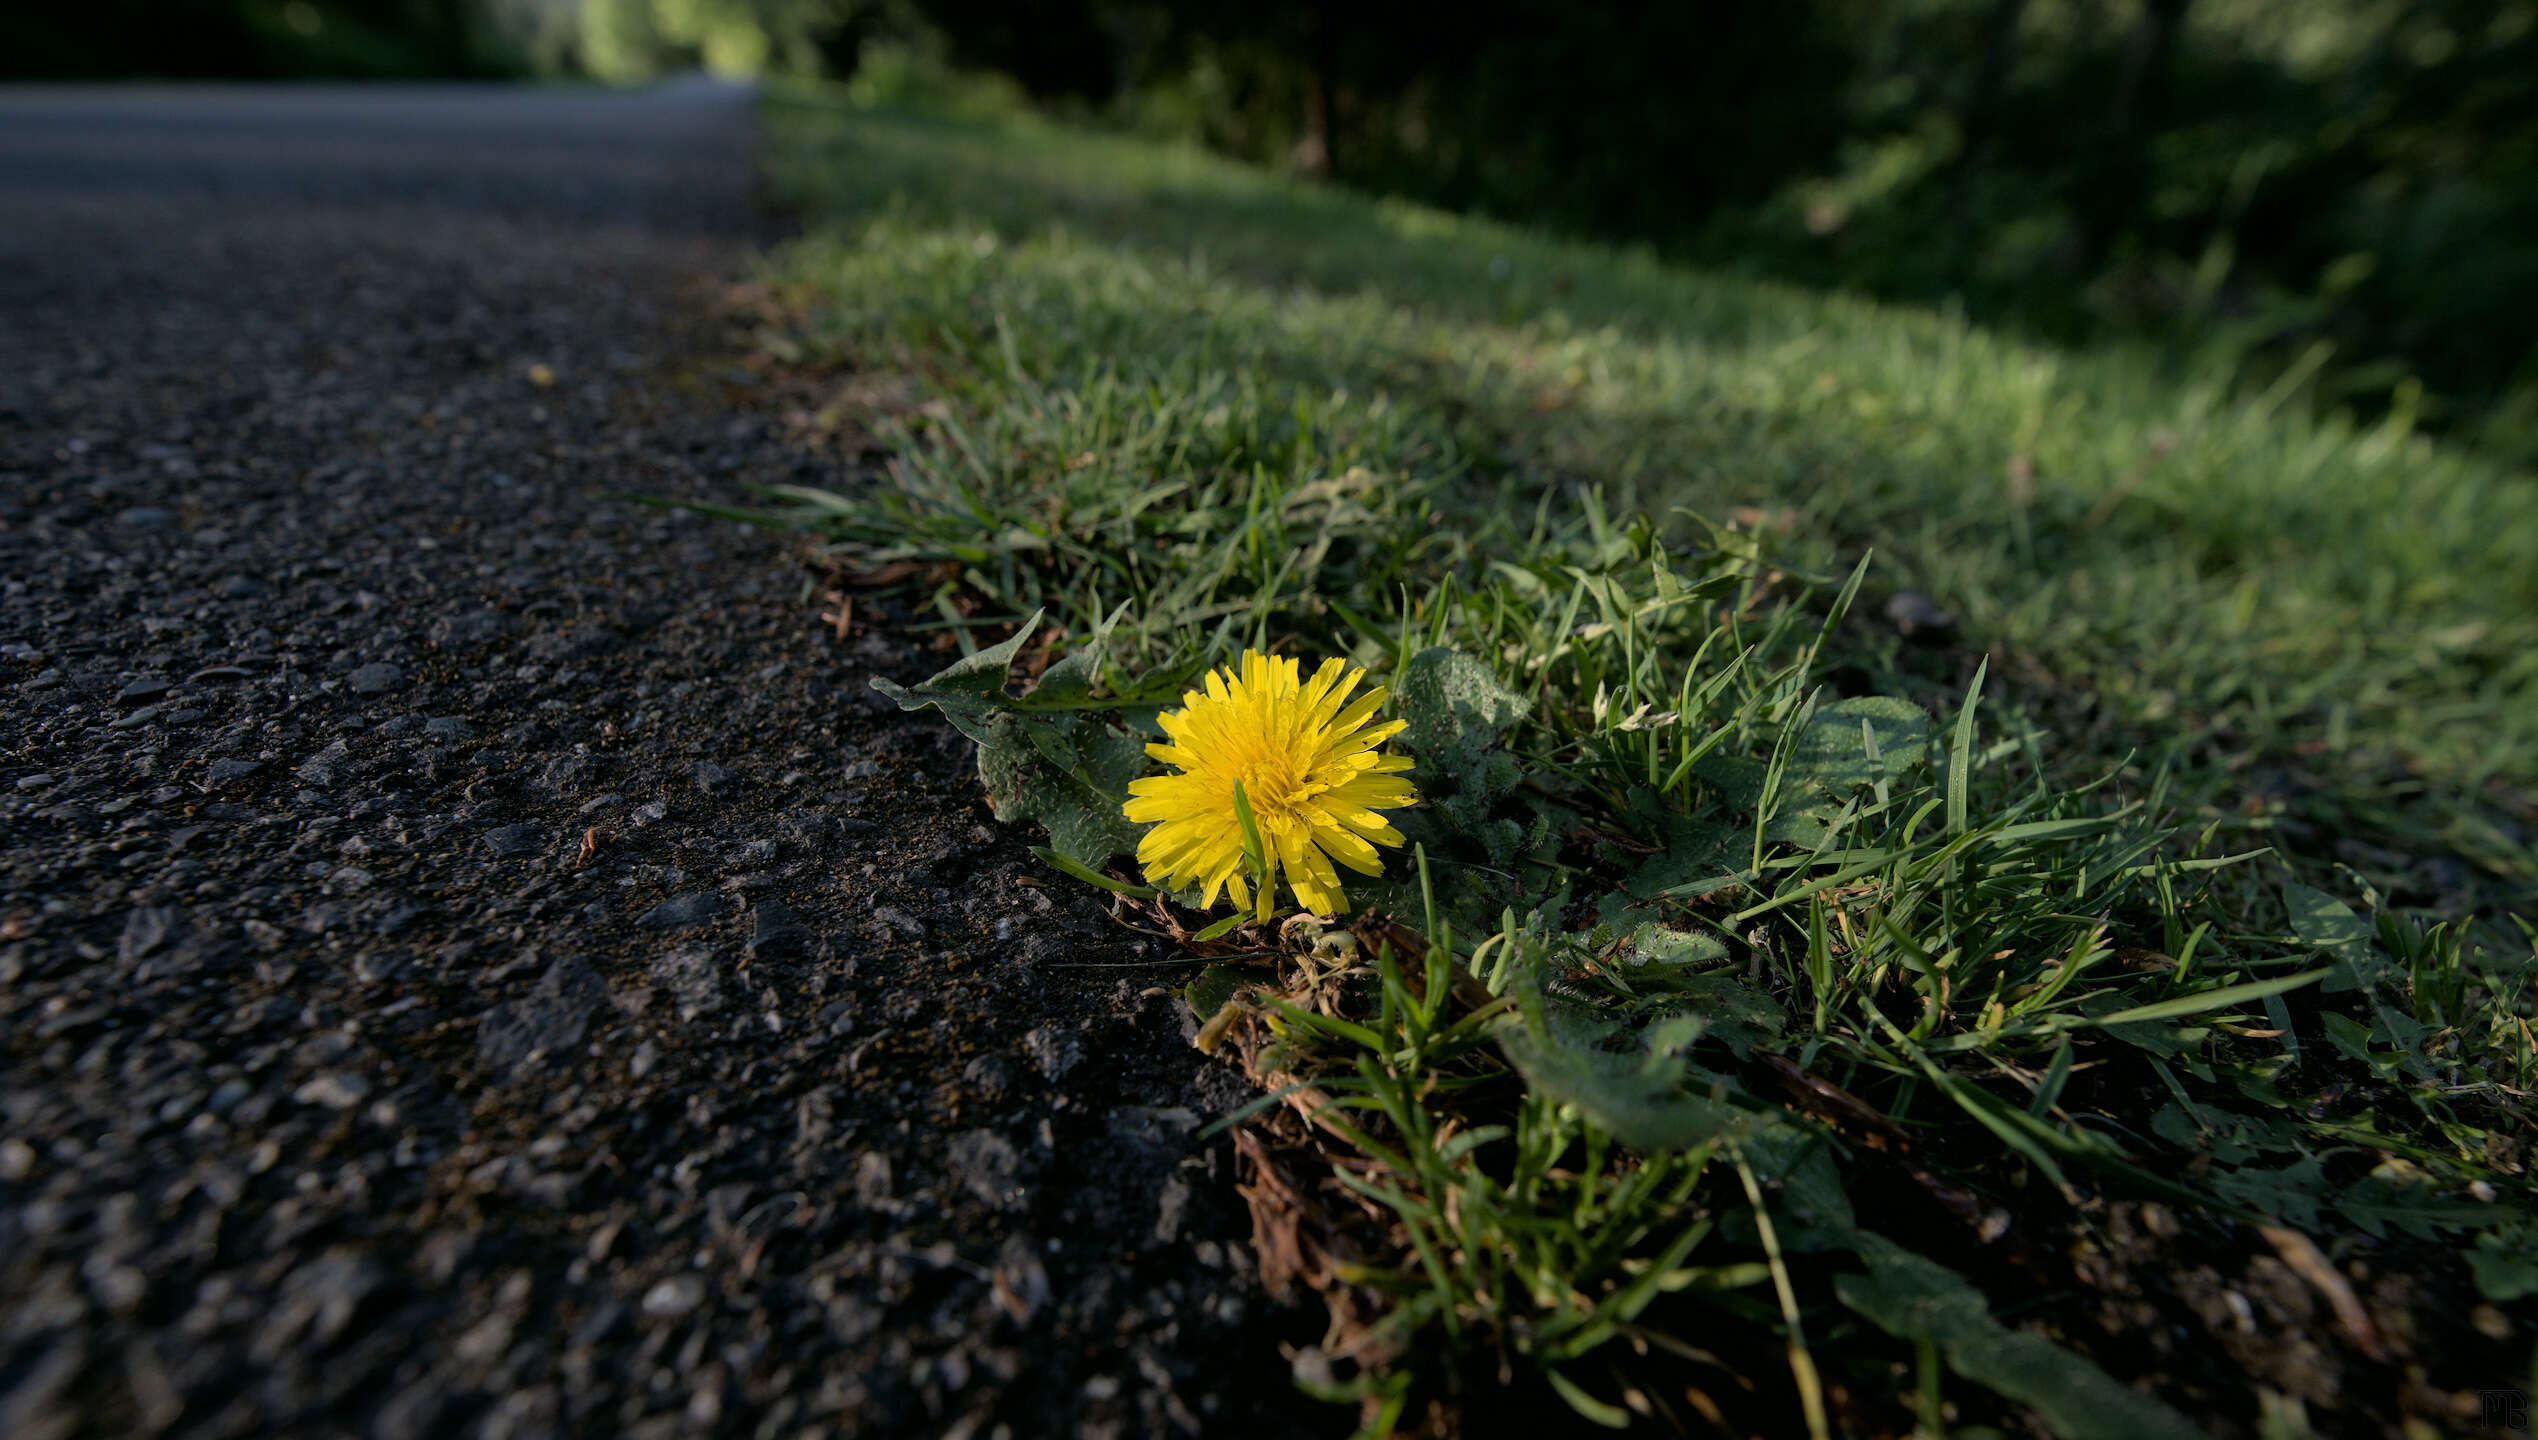 Yellow flower in grass by road